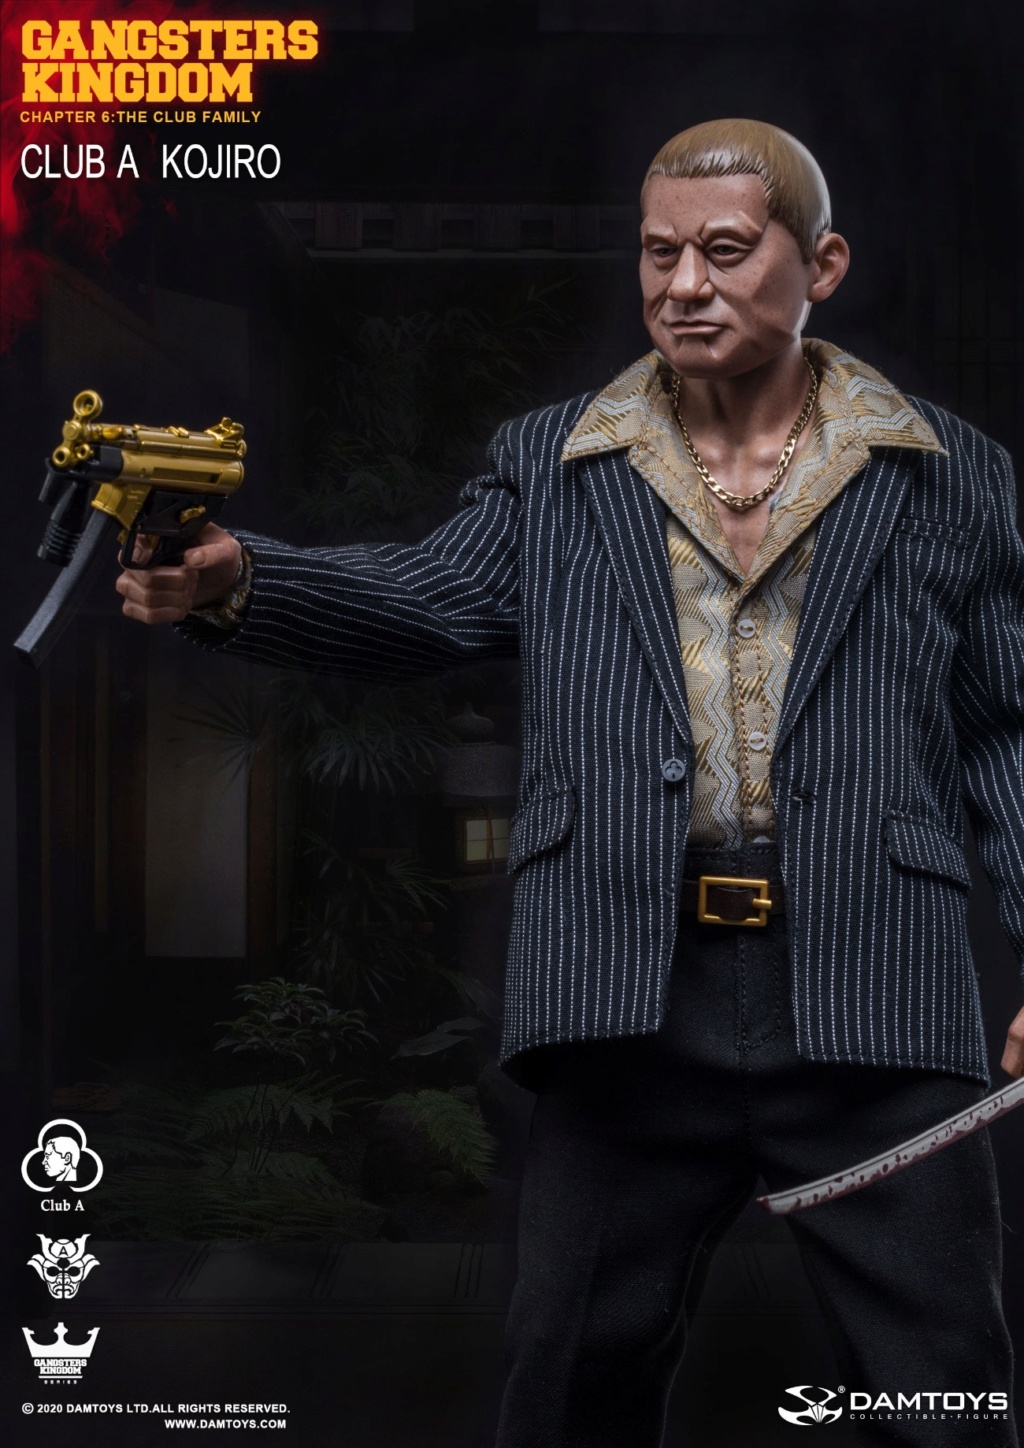 GrassFlower - NEW PRODUCT: DamToys: 1/6 Gangster Kingdom-Grass Flower A KOJIRO Action Figure & Coffee Table Accessory Bag #GK021 15303911